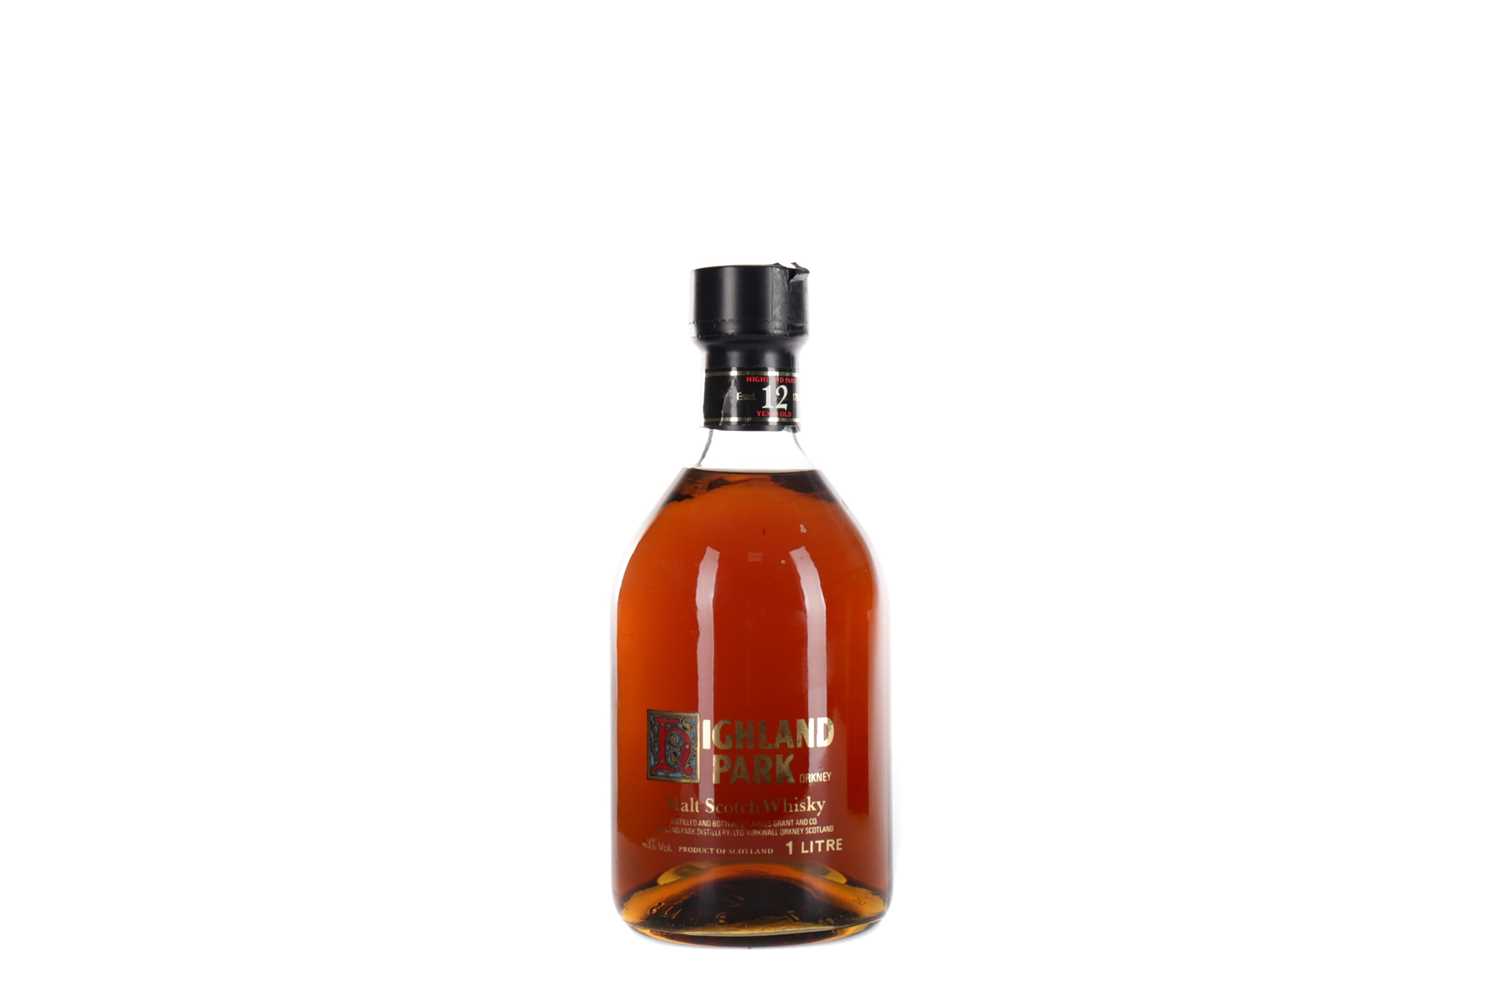 Lot 221 - HIGHLAND PARK 12 YEARS OLD - ONE LITRE